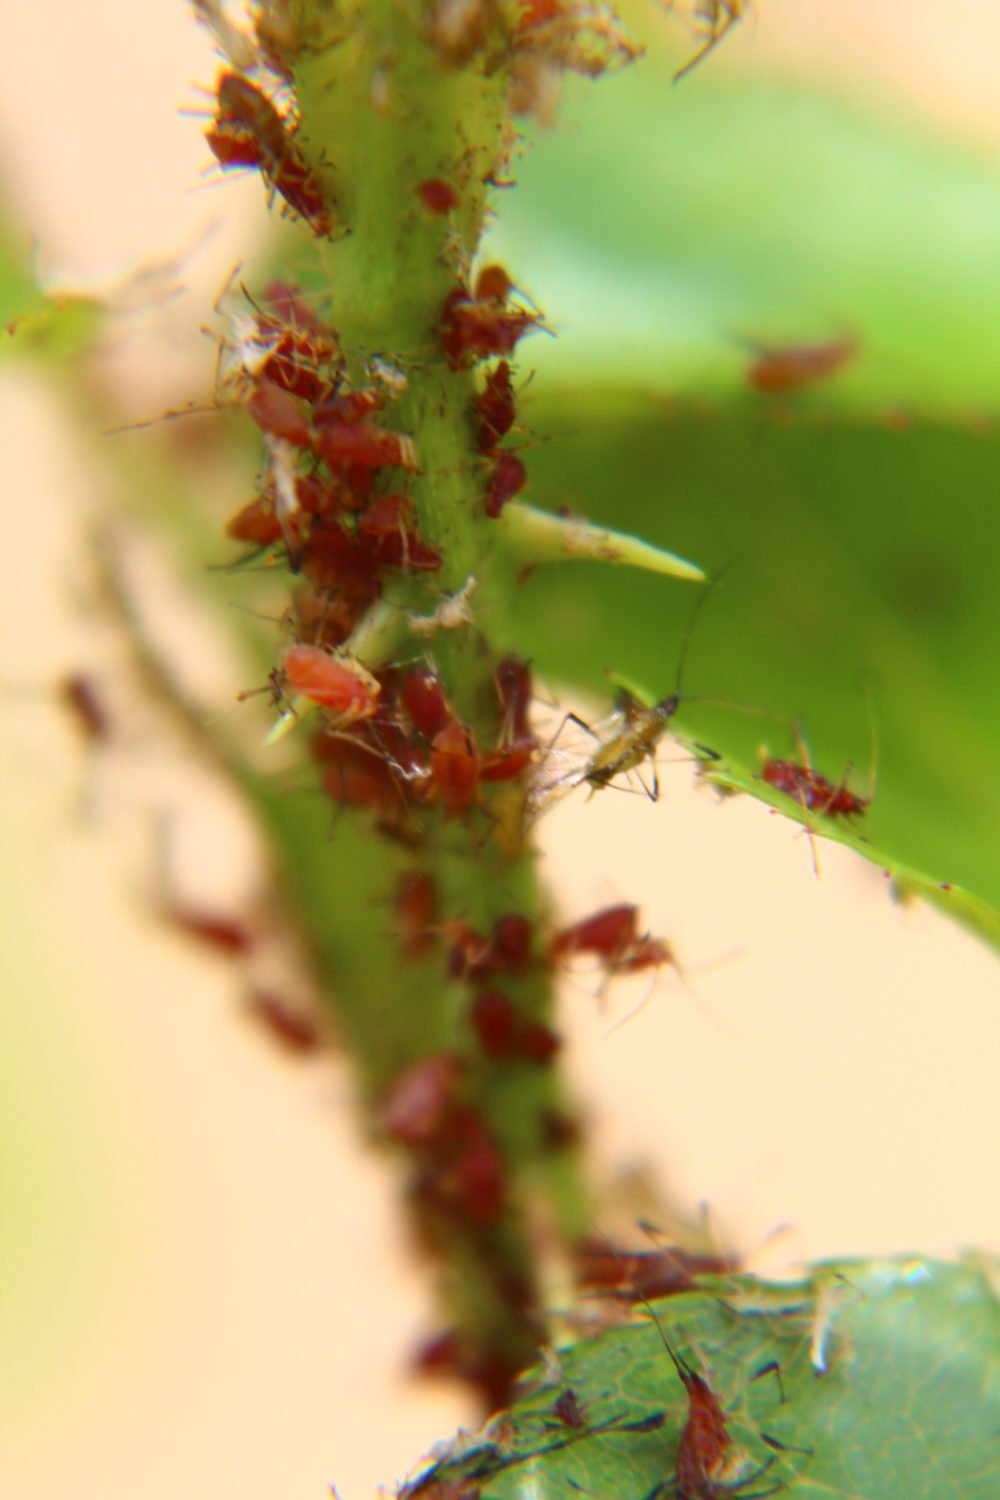 Dead aphids after applying the aphid killer